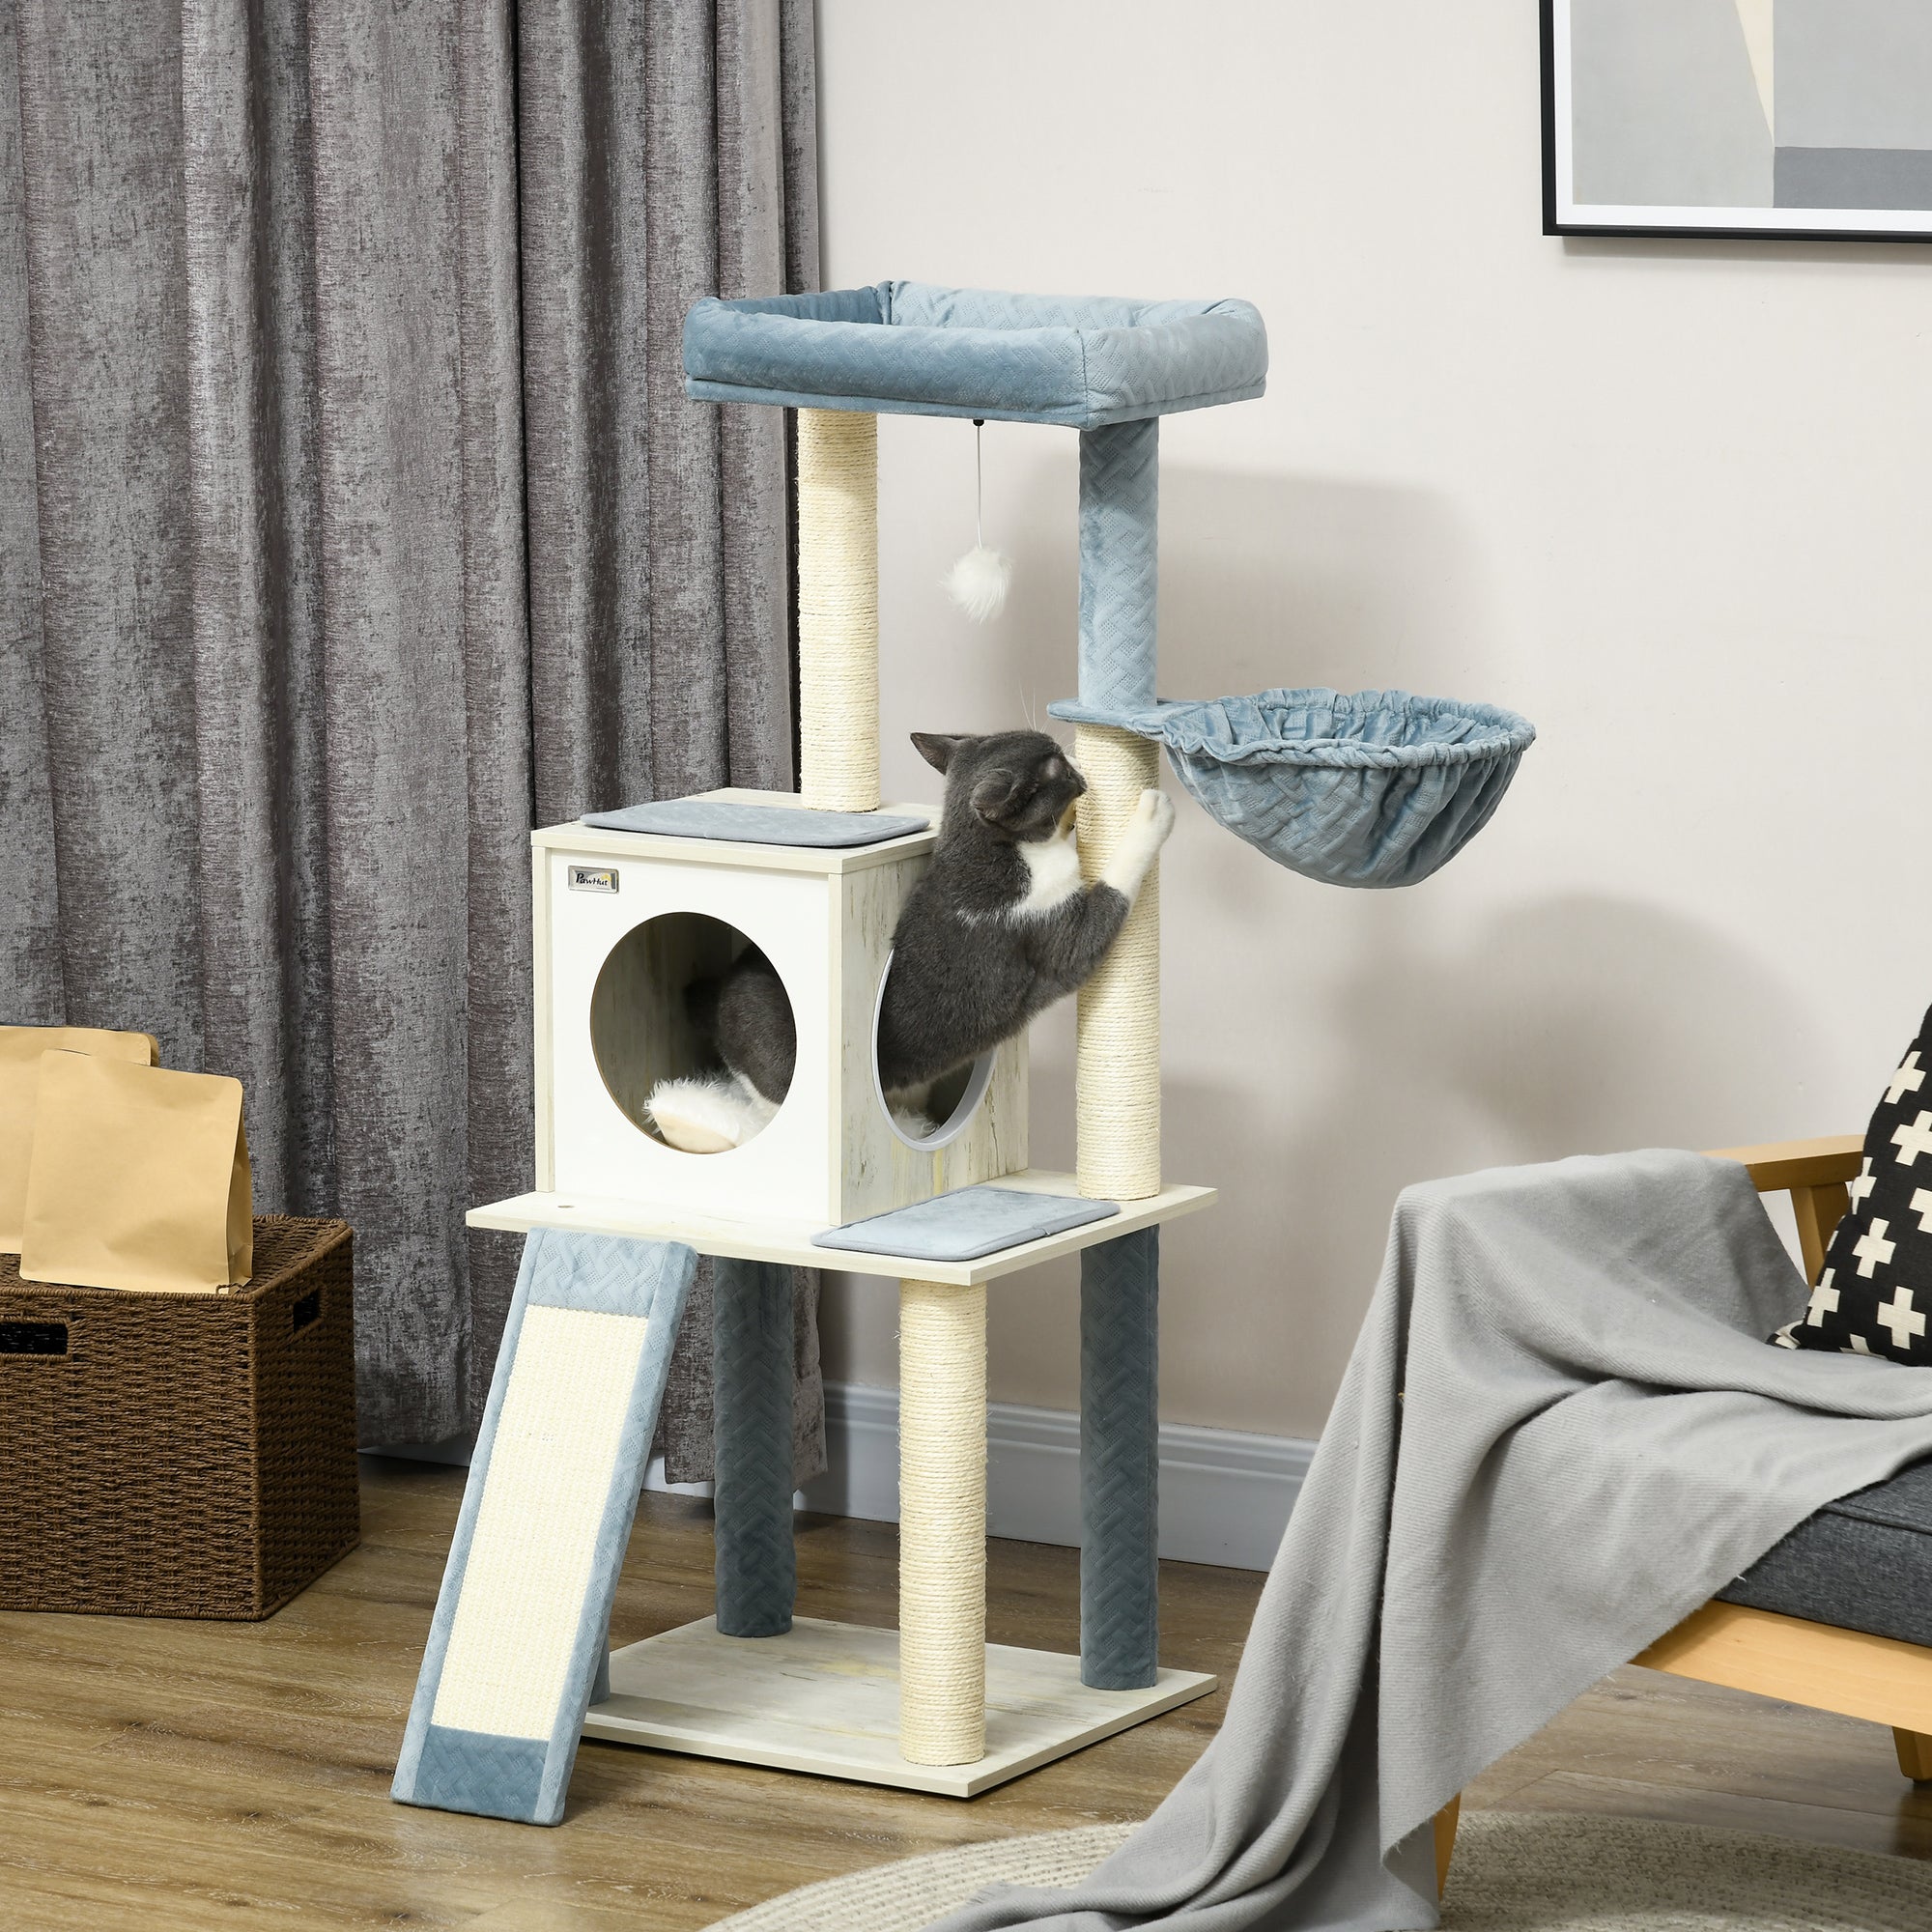 PawHut 114cm Cat Tree for Indoor Cats, with Scratching Posts, hammock, Bed, House